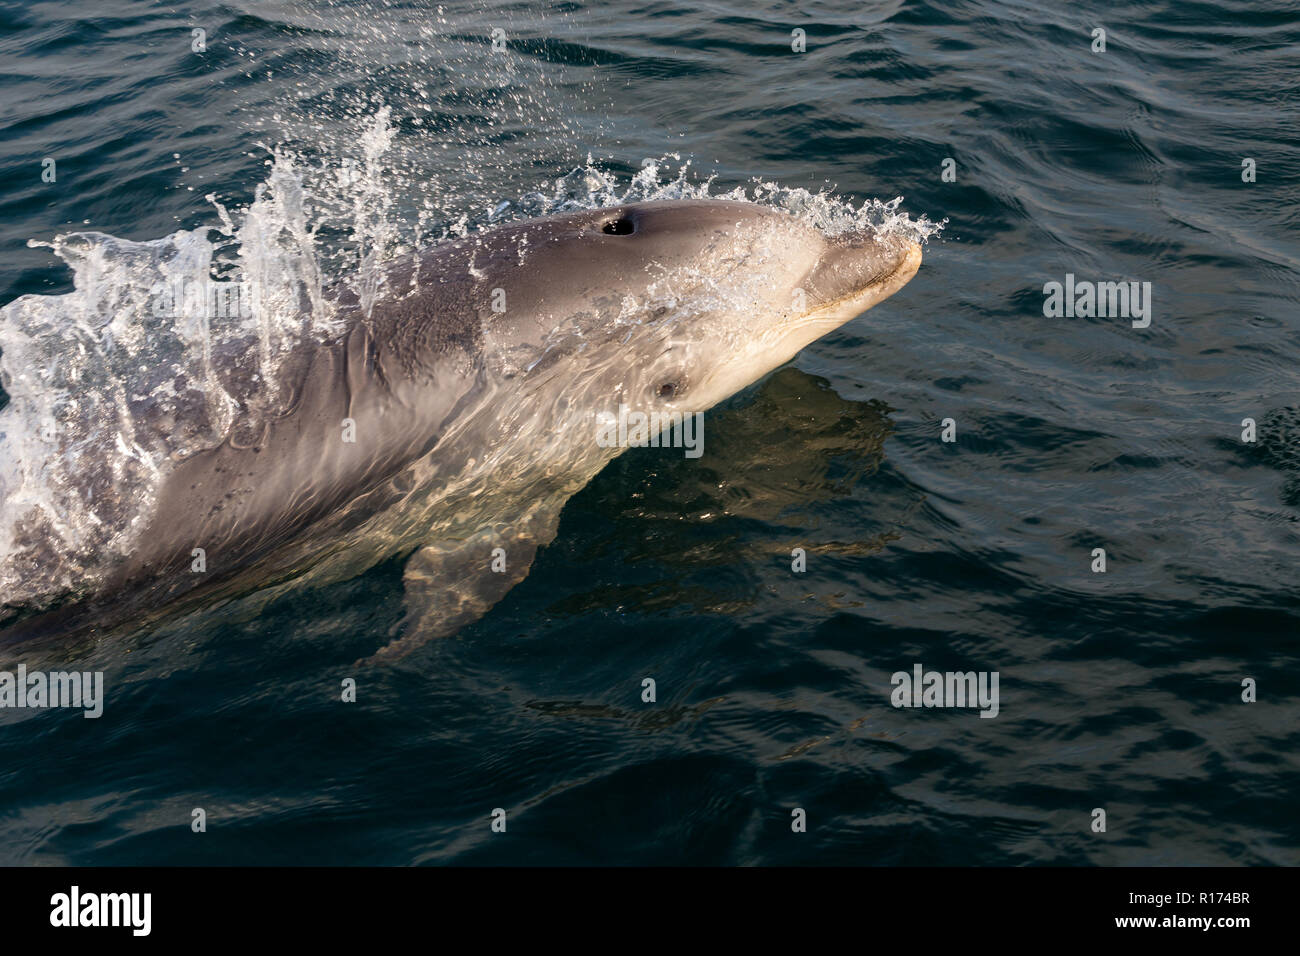 Dolphin swimming in Iroise sea, Brittany, France Stock Photo